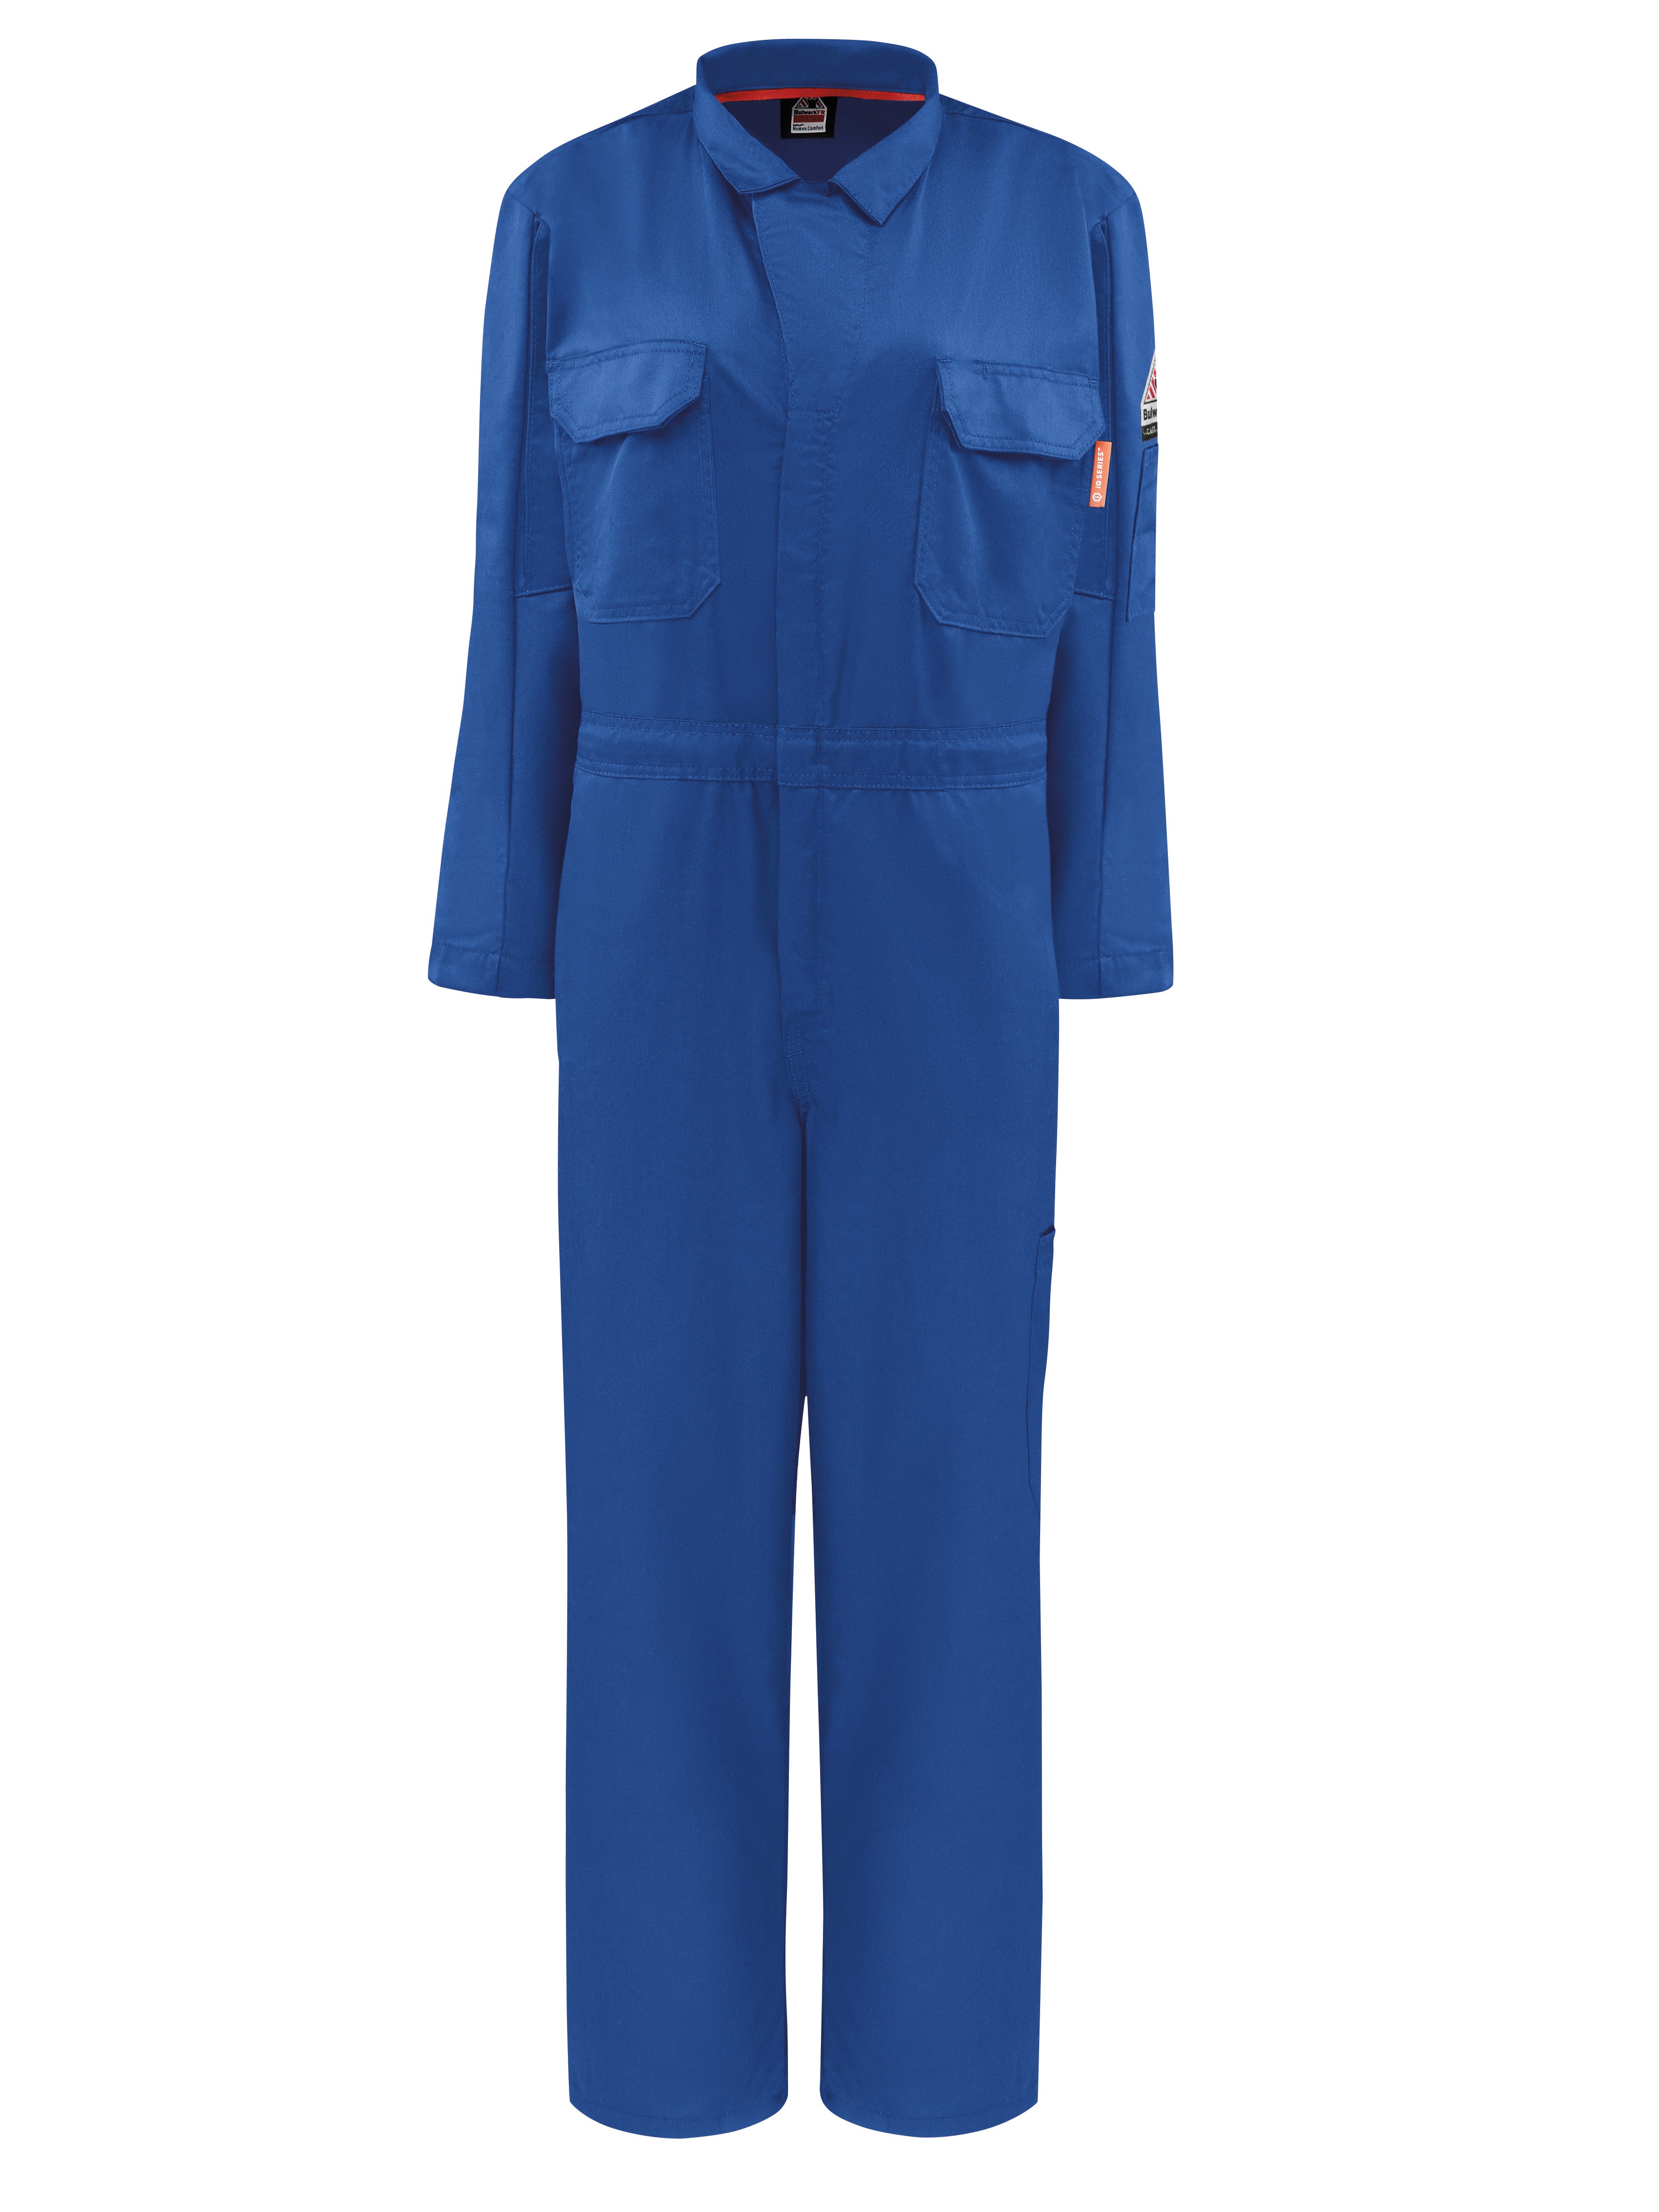 iQ Series Women’s Midweight Mobility Coverall QC23 - Royal-eSafety Supplies, Inc